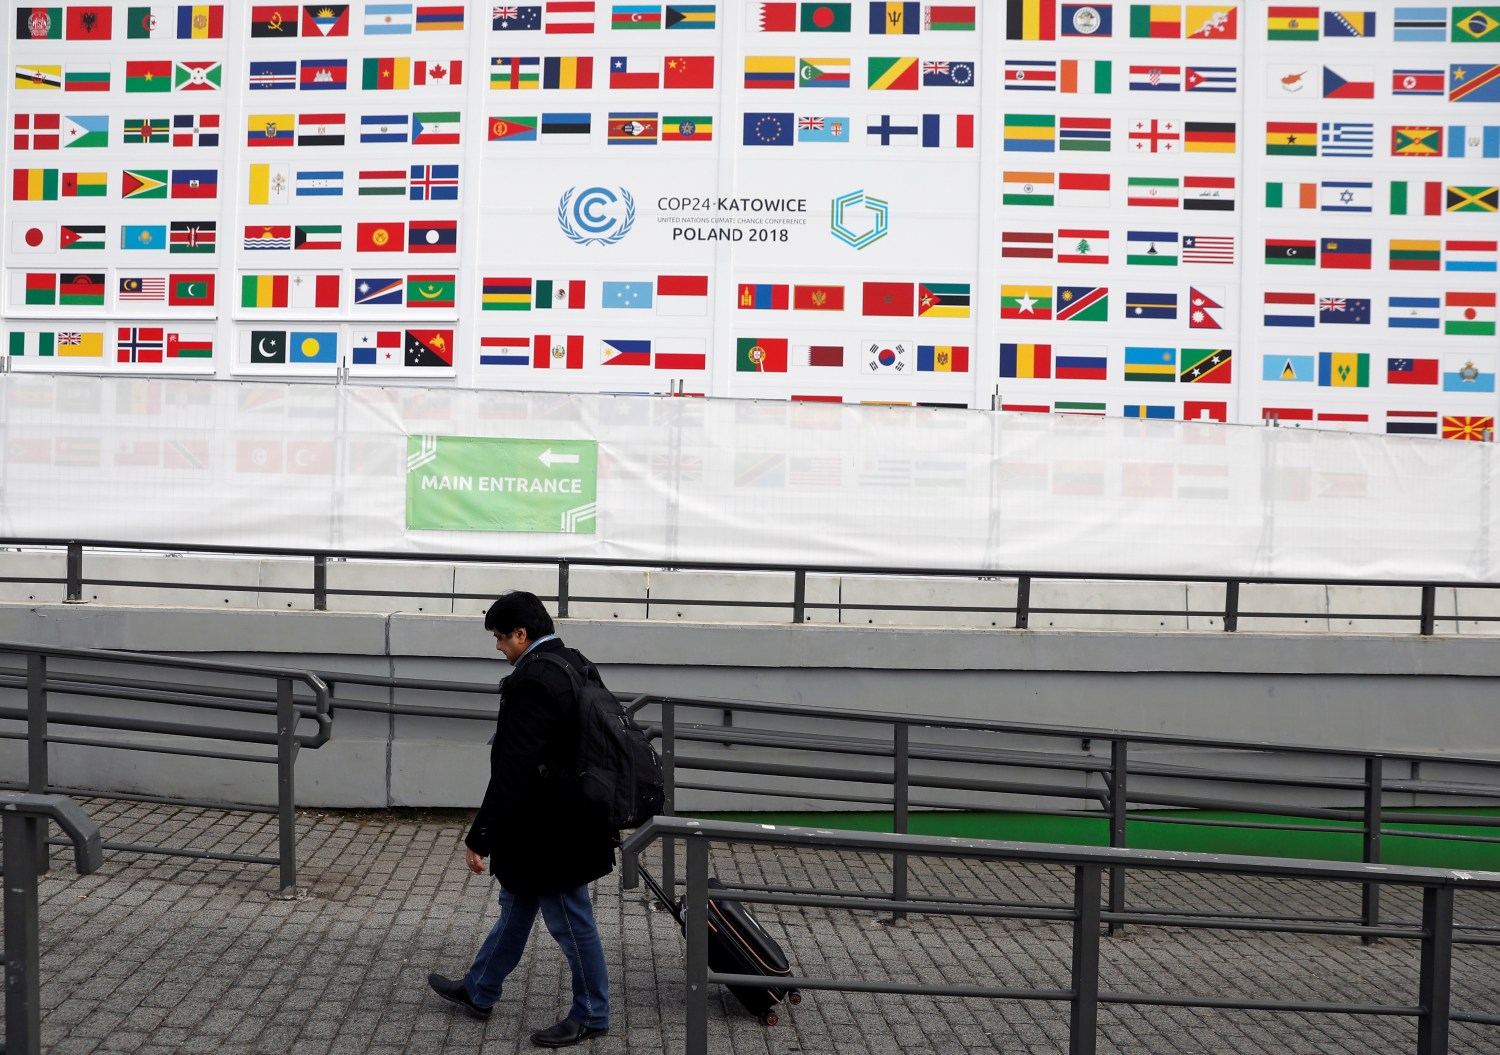 A delegate arrives for the COP24 UN Climate Change Conference 2018 in Katowice, Poland December 2, 2018. REUTERS/Kacper Pempel